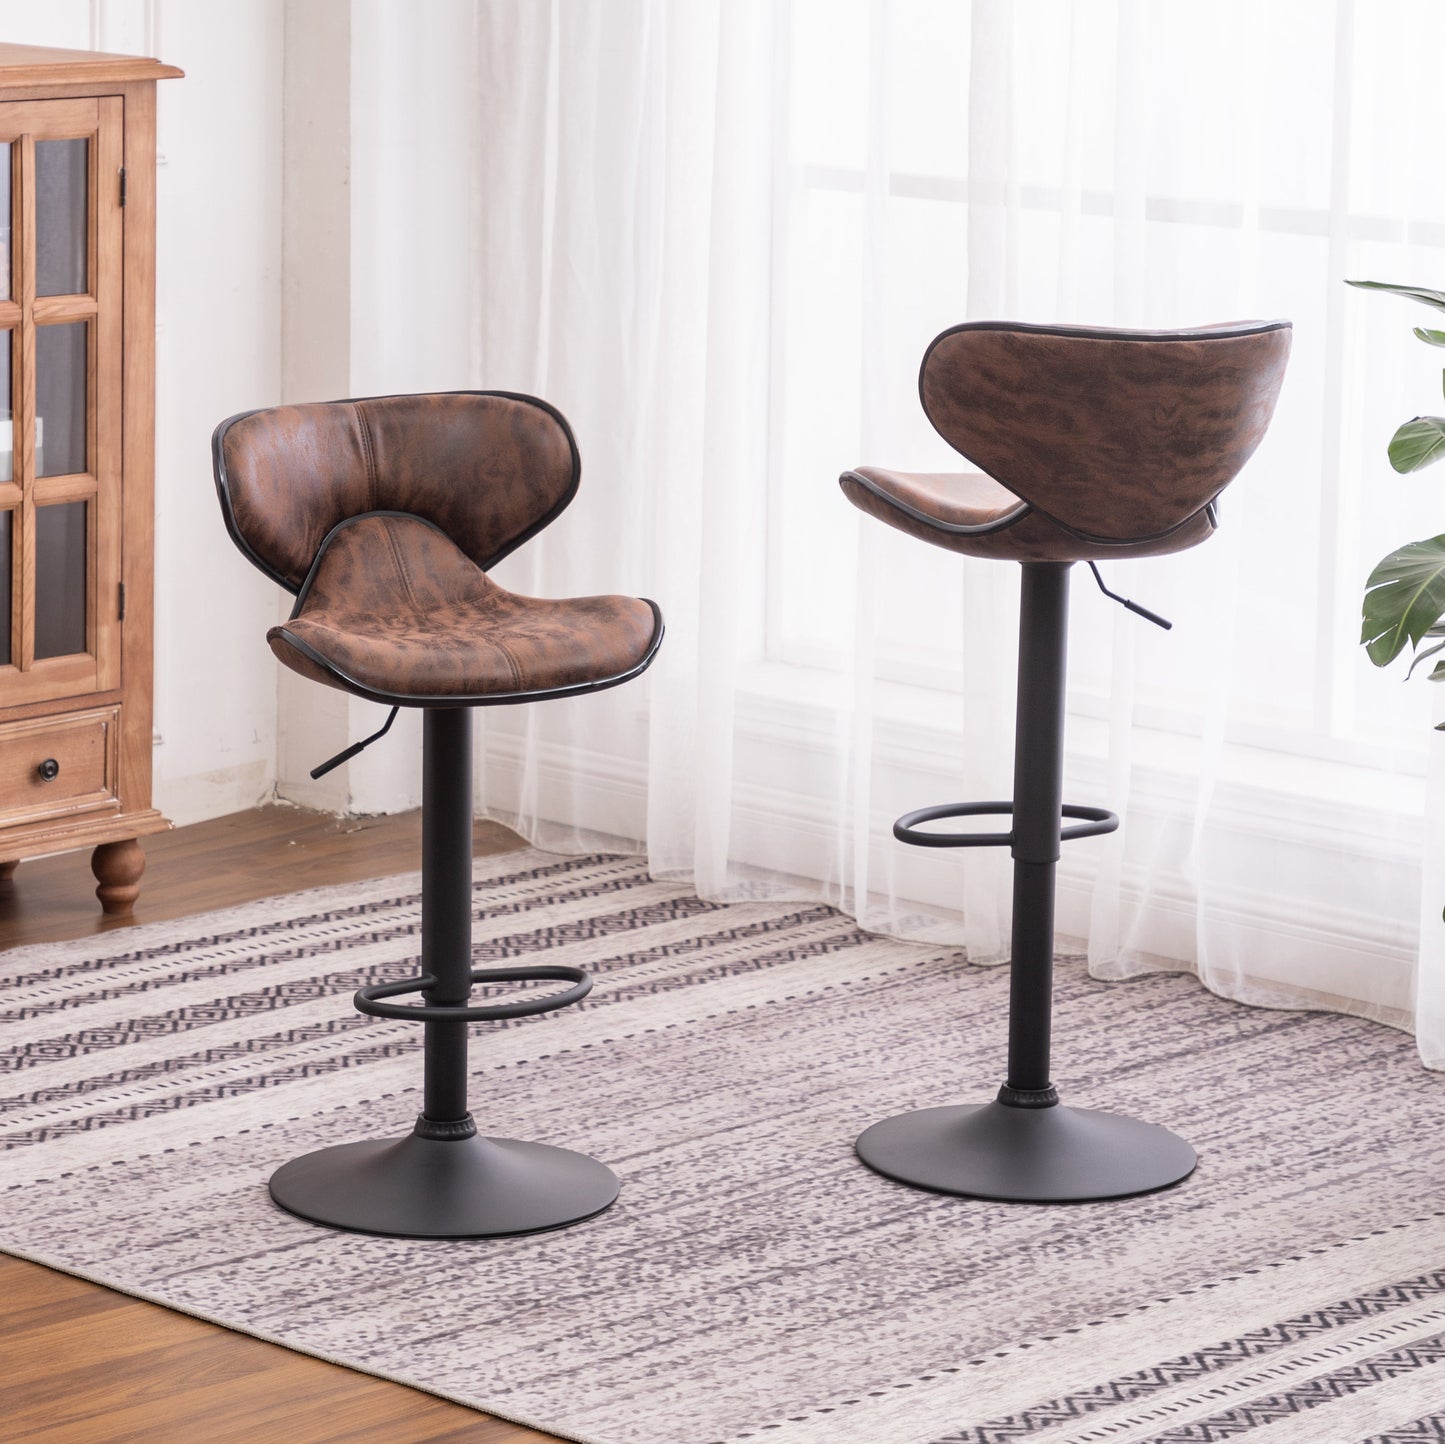 Masaccio Weathered Upholstery Airlift Adjustable Swivel Barstool with Chrome Base, Set of 2, Brown